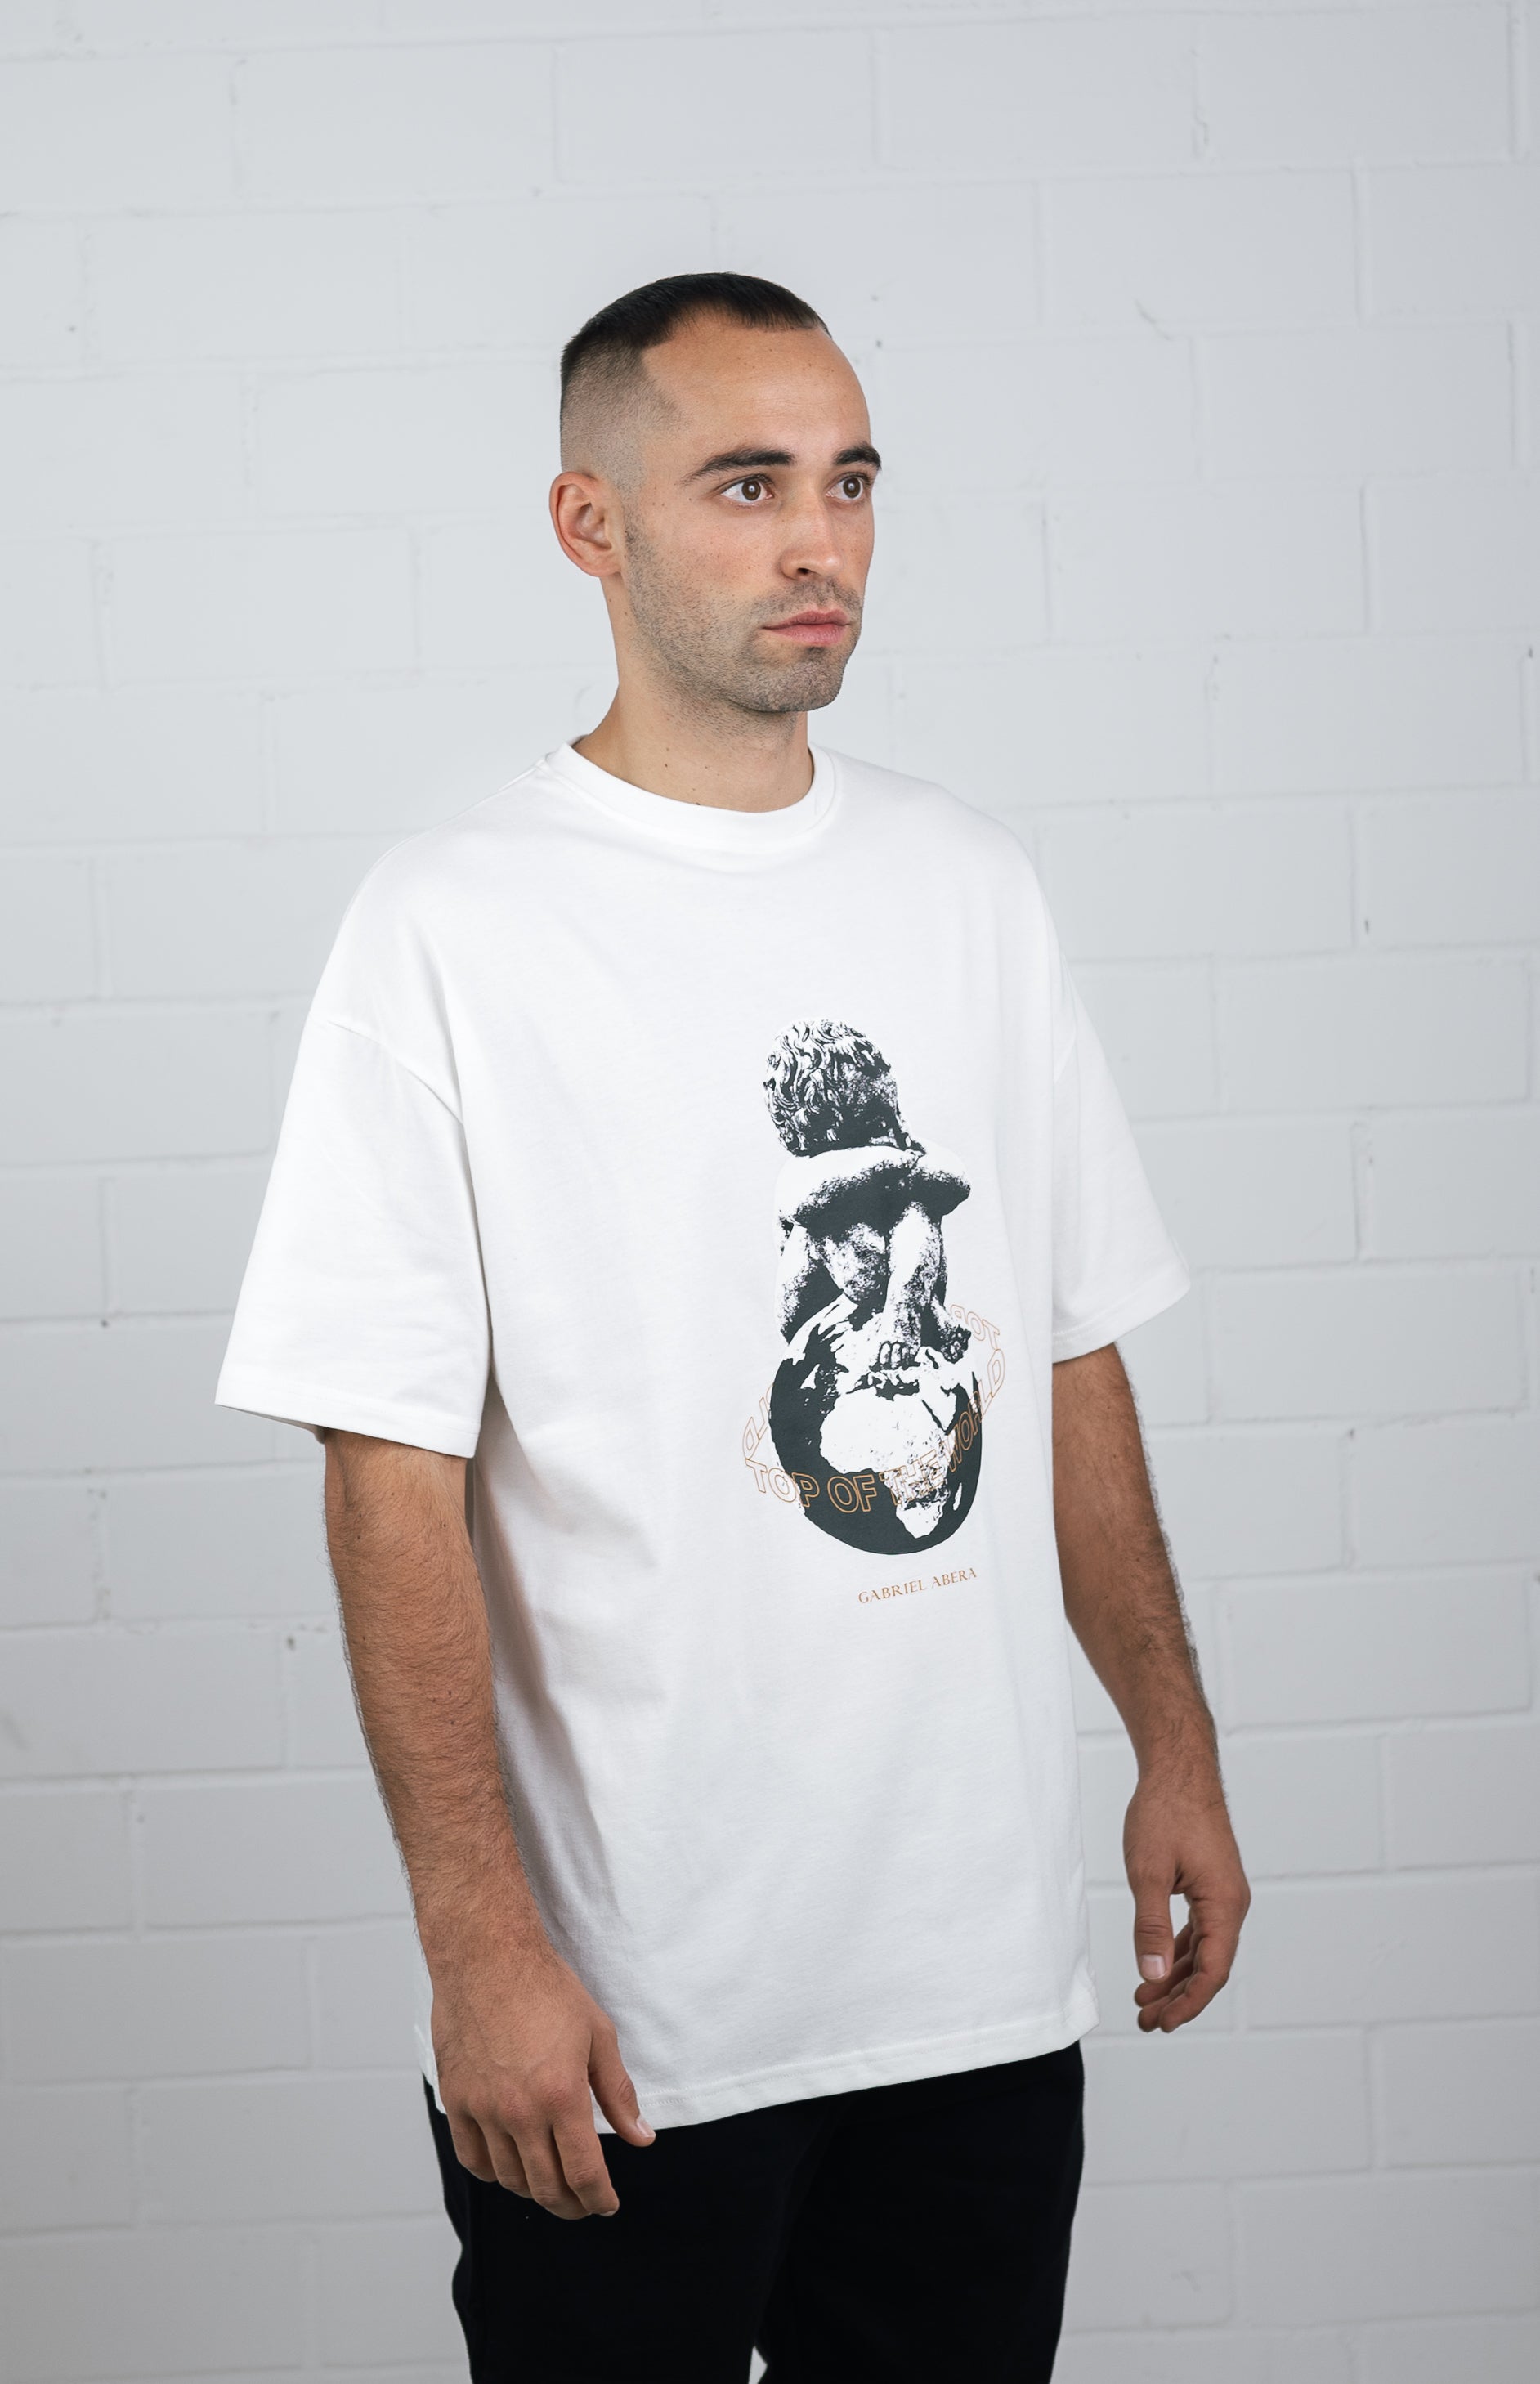 Male model wearing a White oversize t shirt with kid on globe design in the front